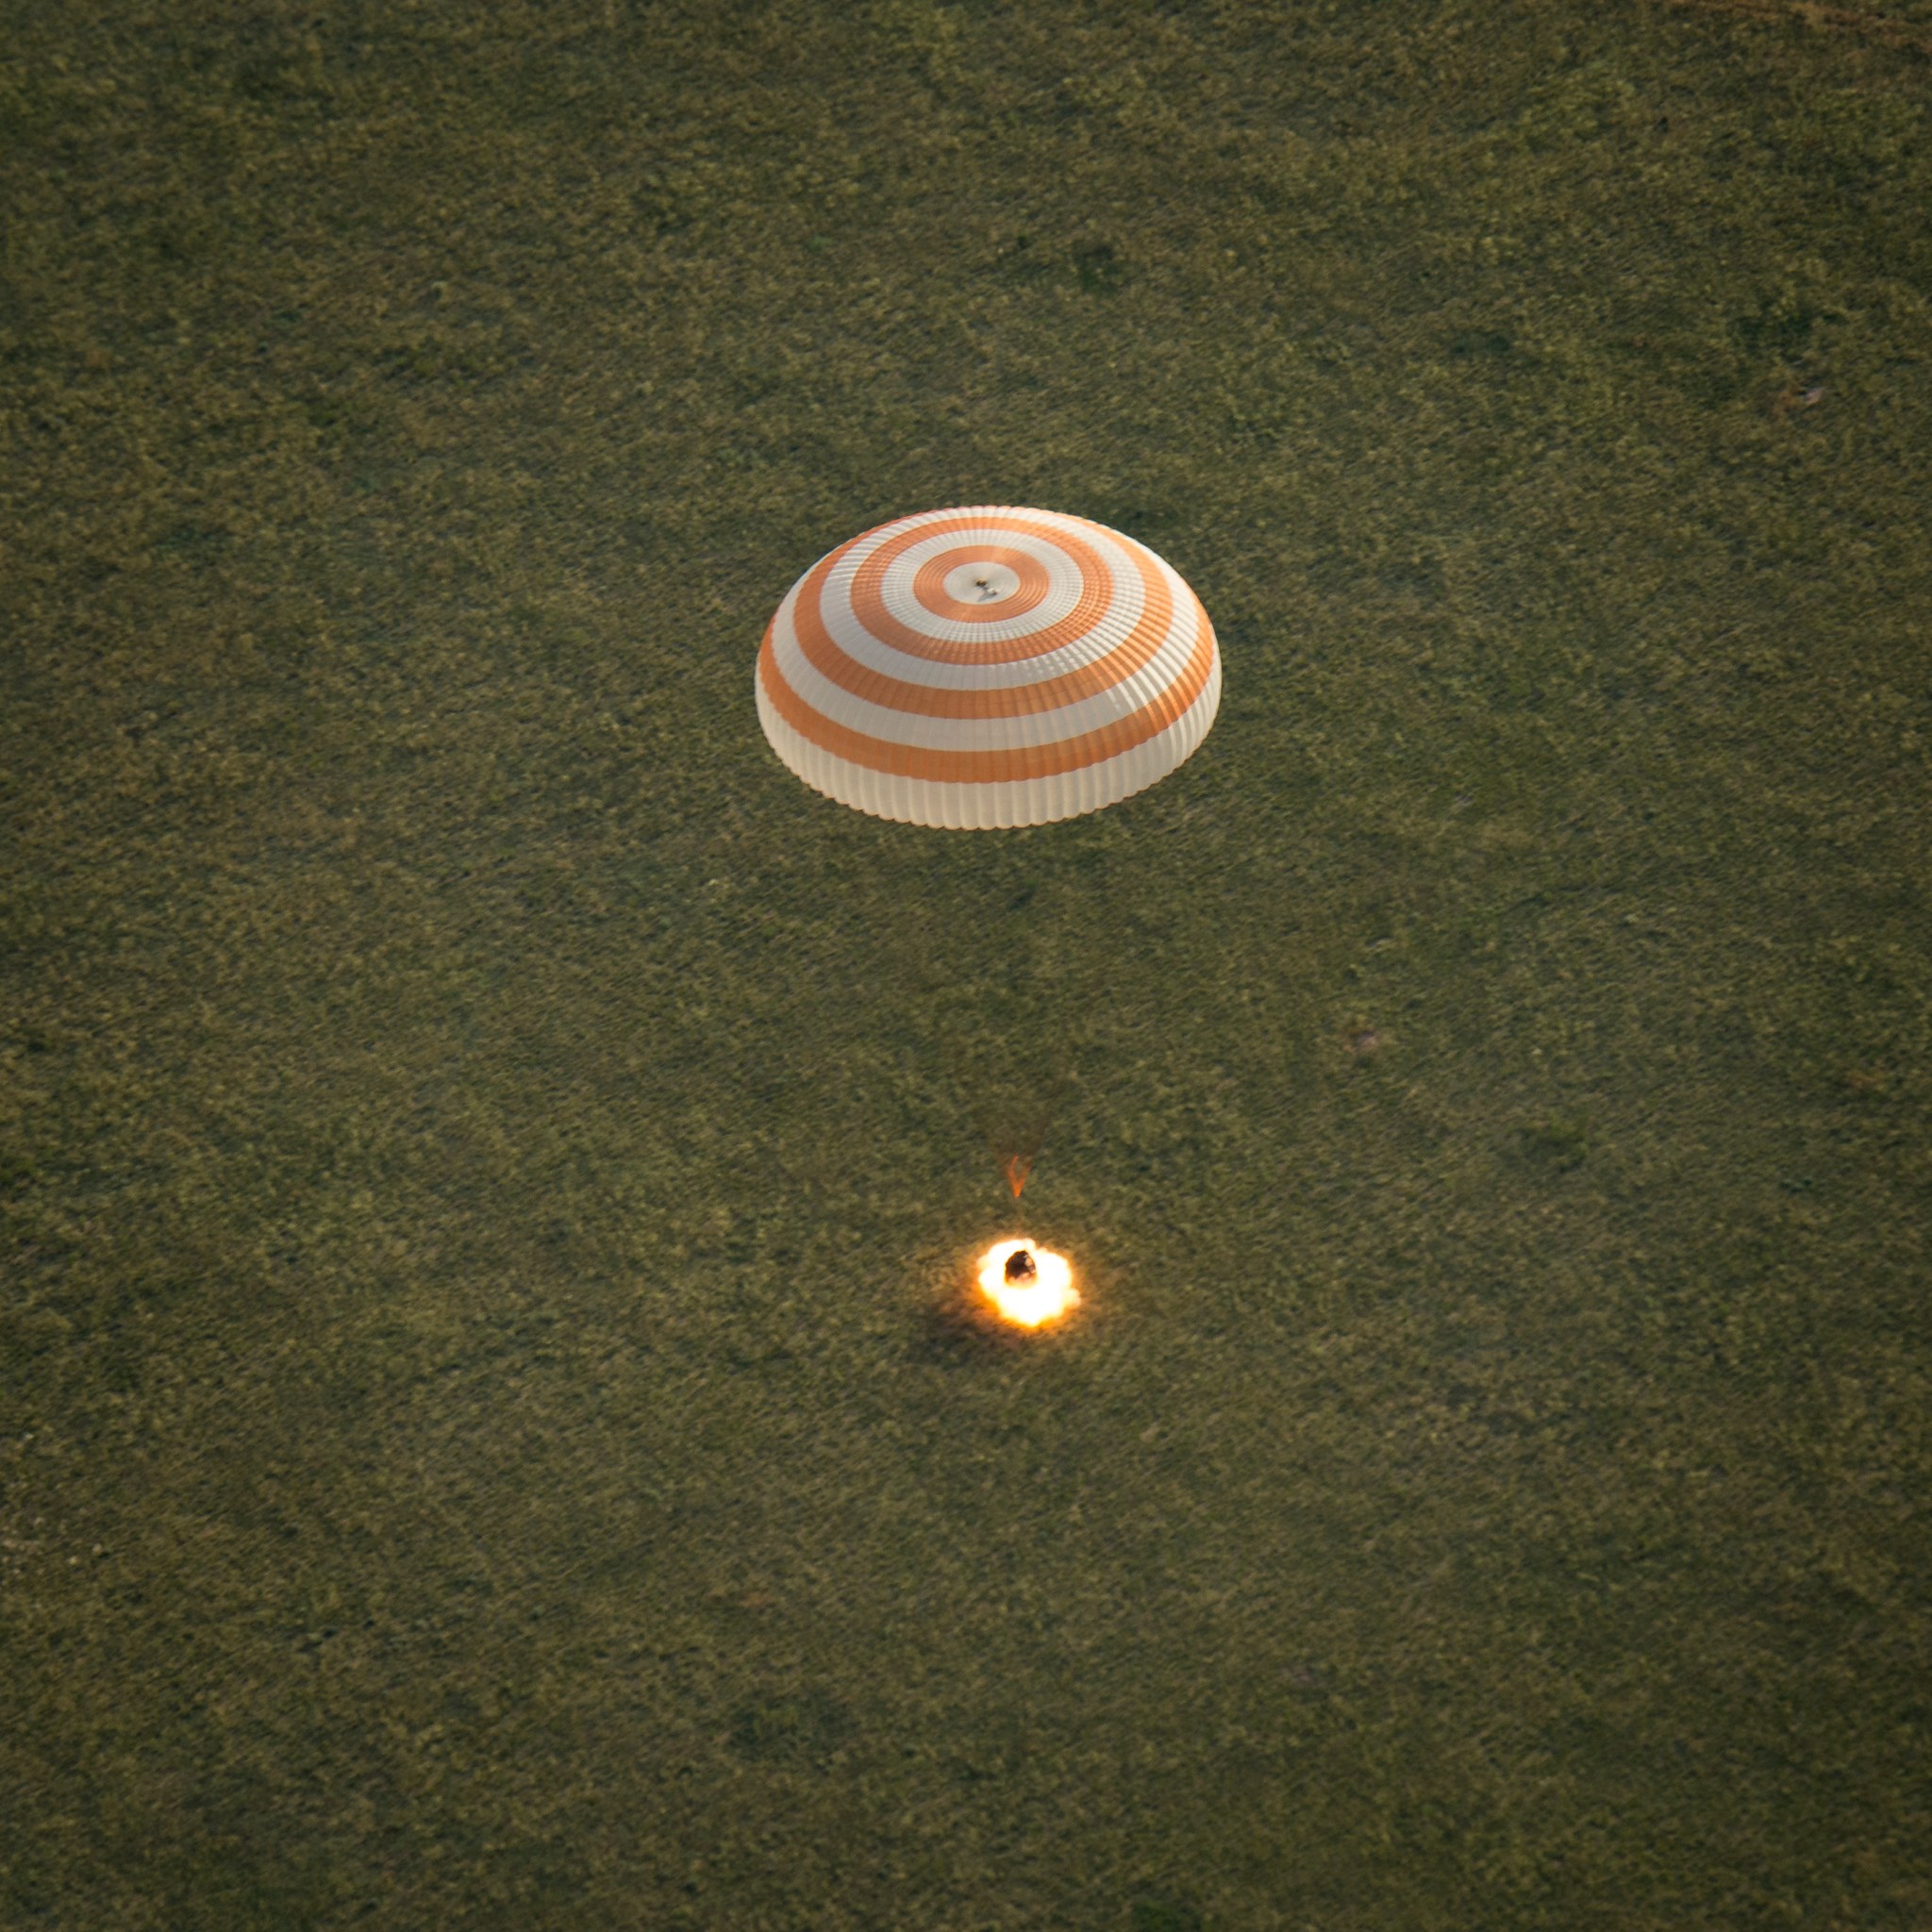 Expedition 43 Crew lands